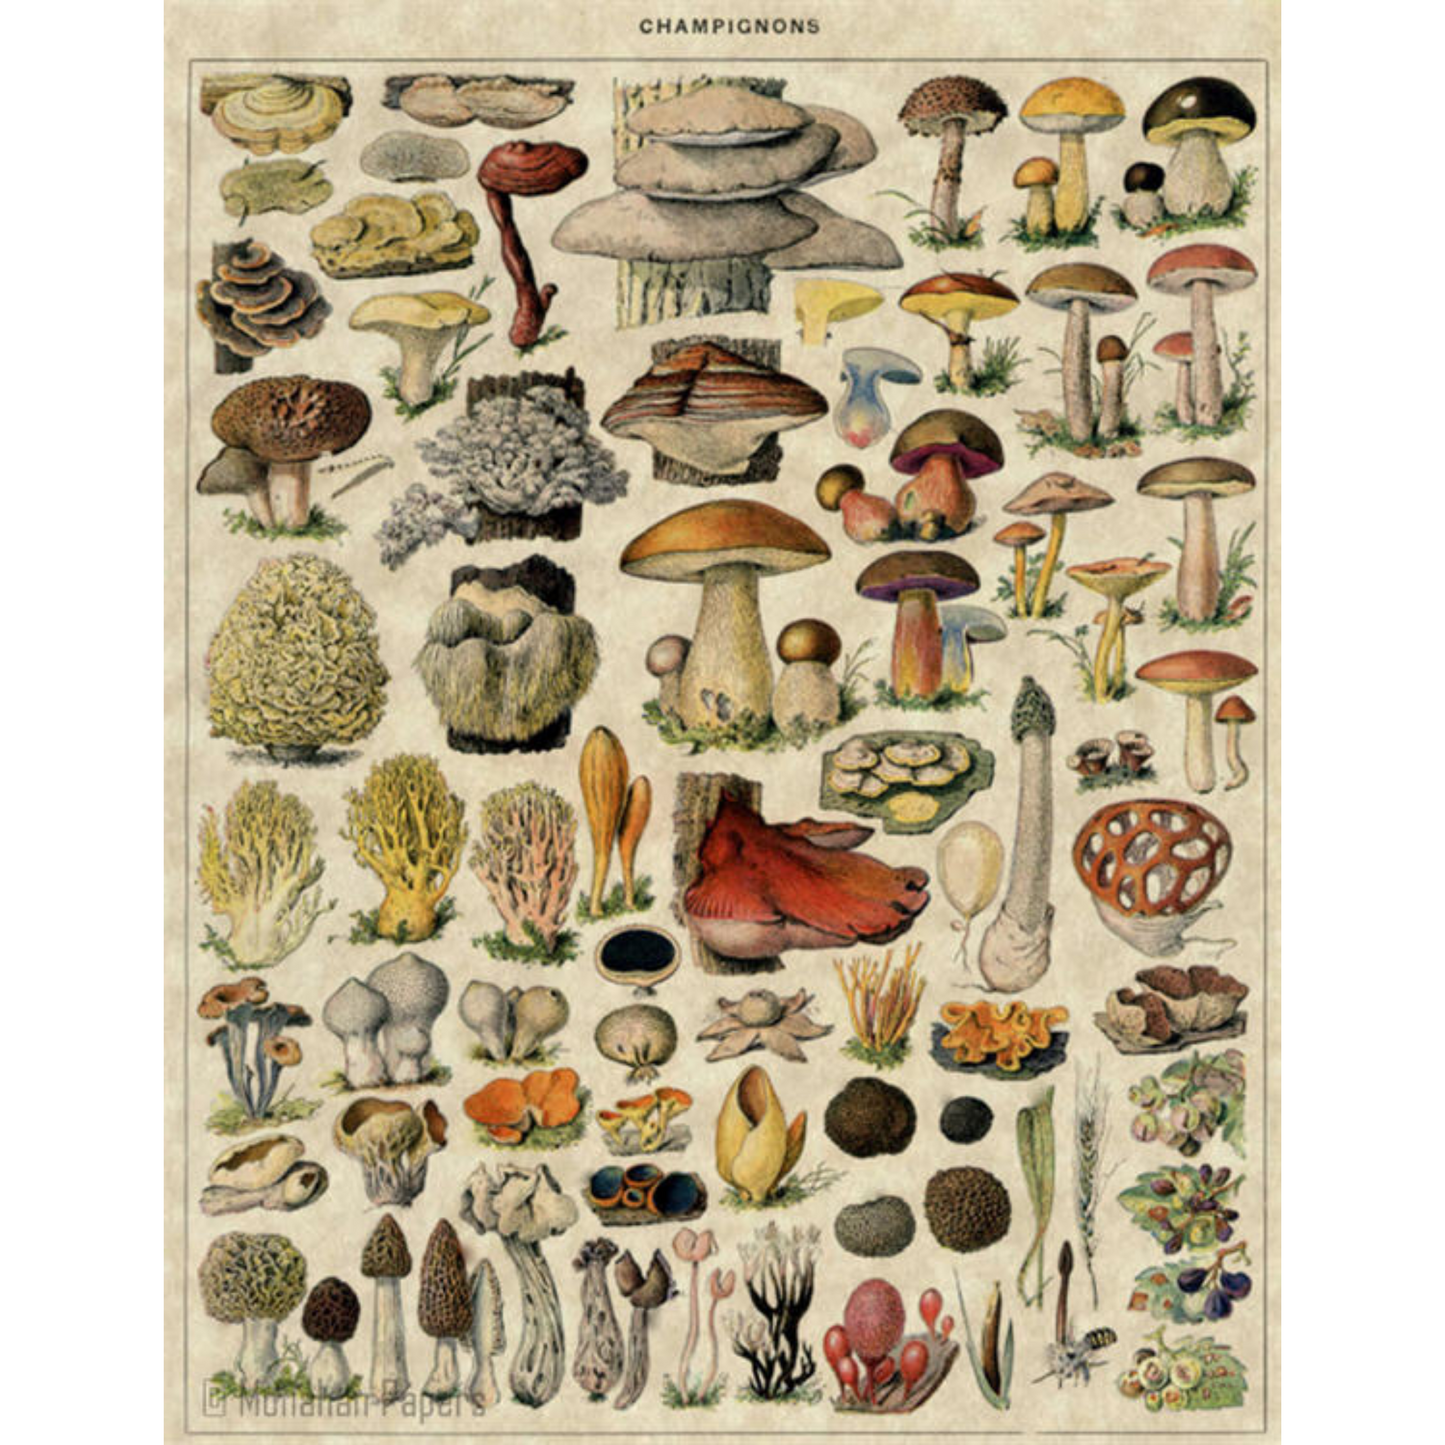 Champignons-Mushrooms-Decoupage Paper by Monahan Papers. Size 11" x 17" available at Milton's Daughter.